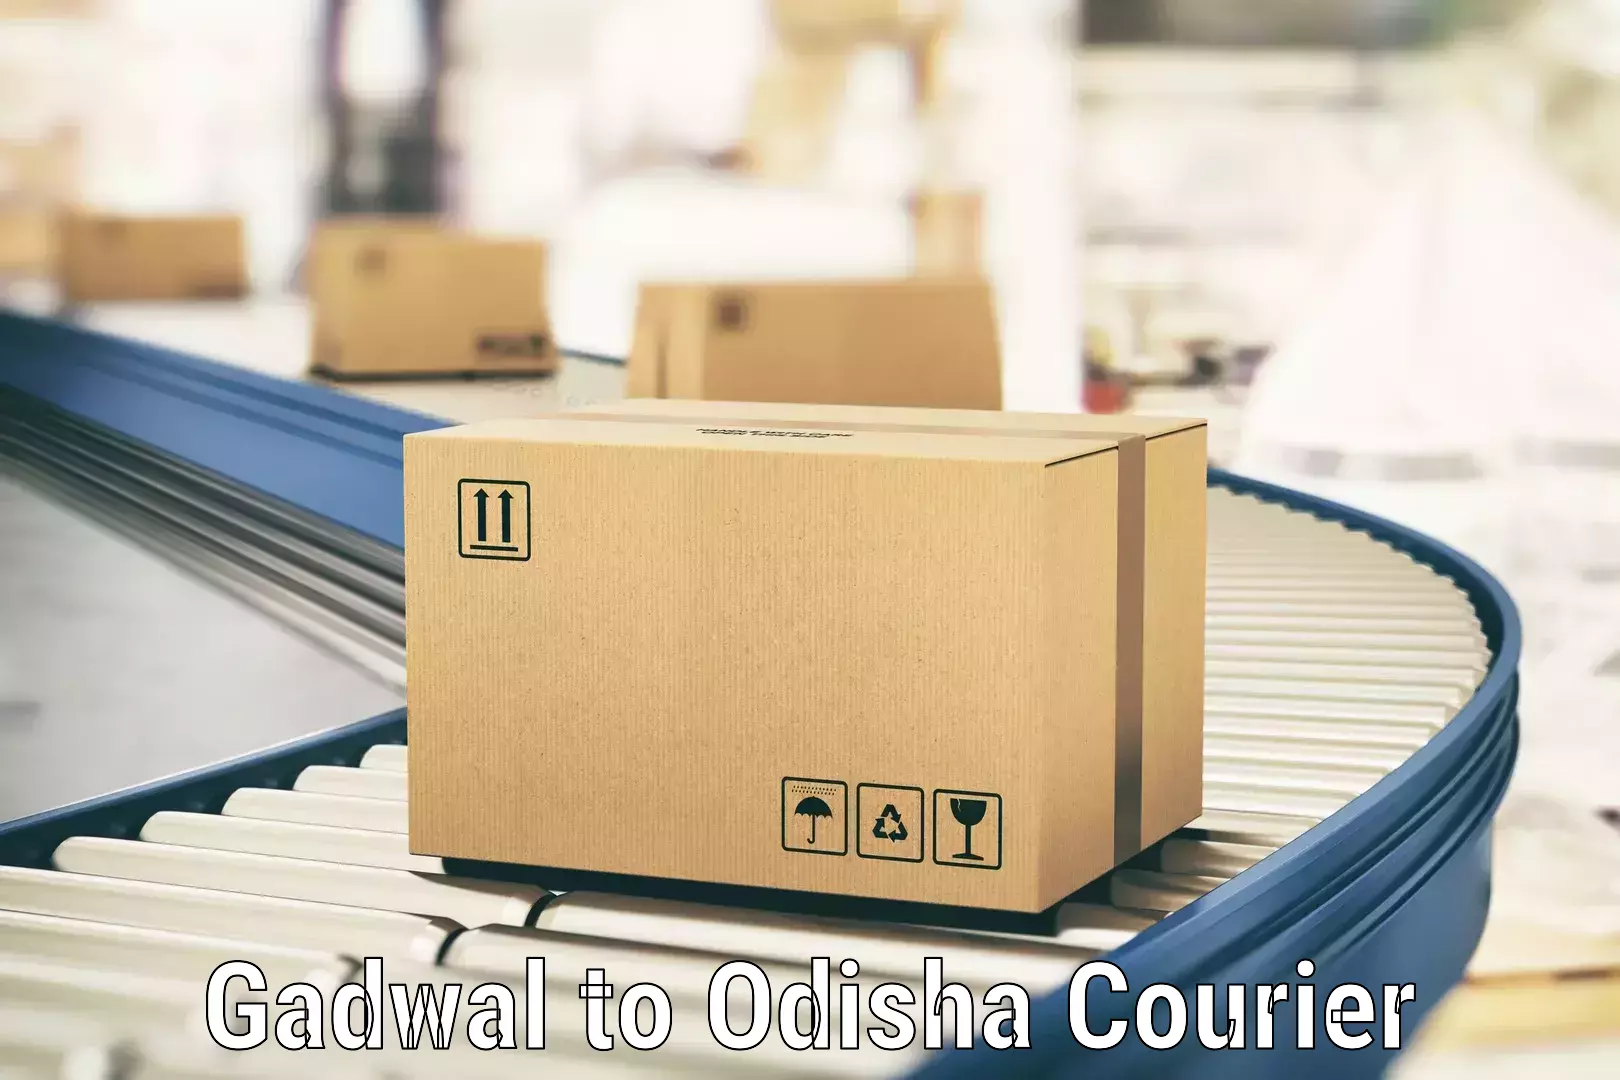 Online courier booking Gadwal to Raruan